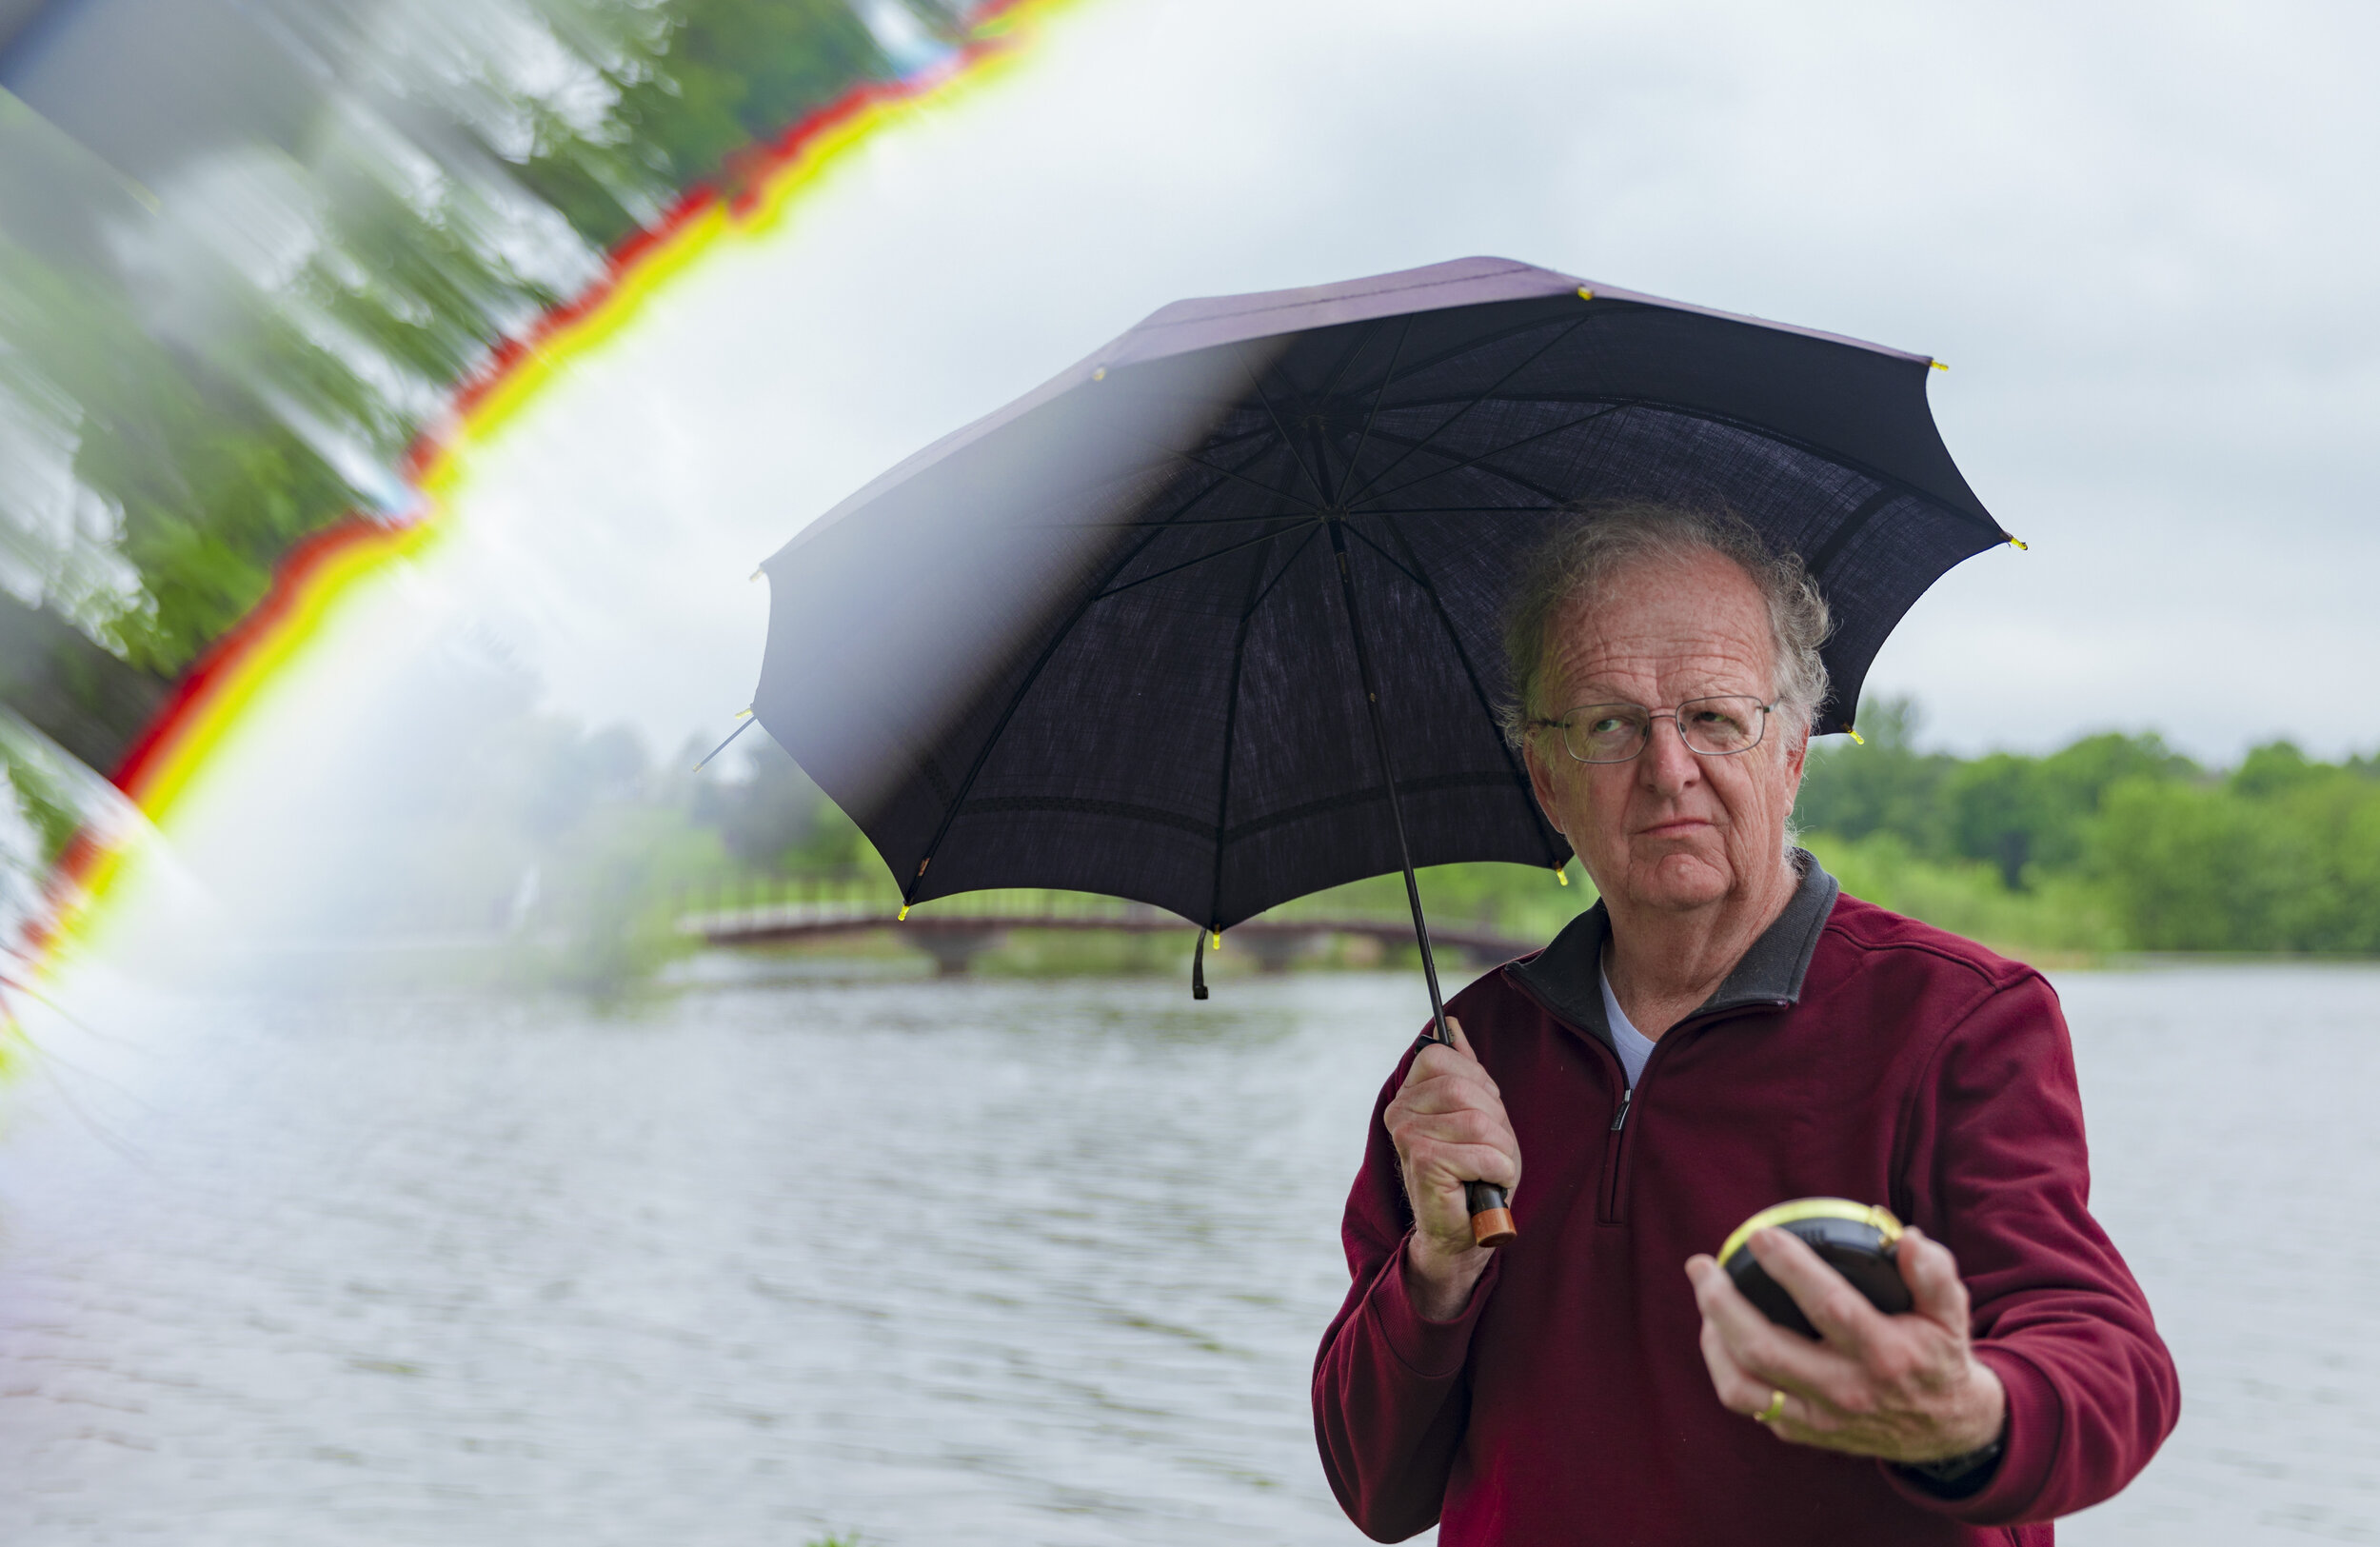  Ken Dewey one of the all-time popular professors at UNL for his love of weather poses for a portrait on Friday, May 22, 2020, at Holmes Lake Park. The rainbow seen is achieved using a triangular prism. Ken spends most of his retirement still studyin